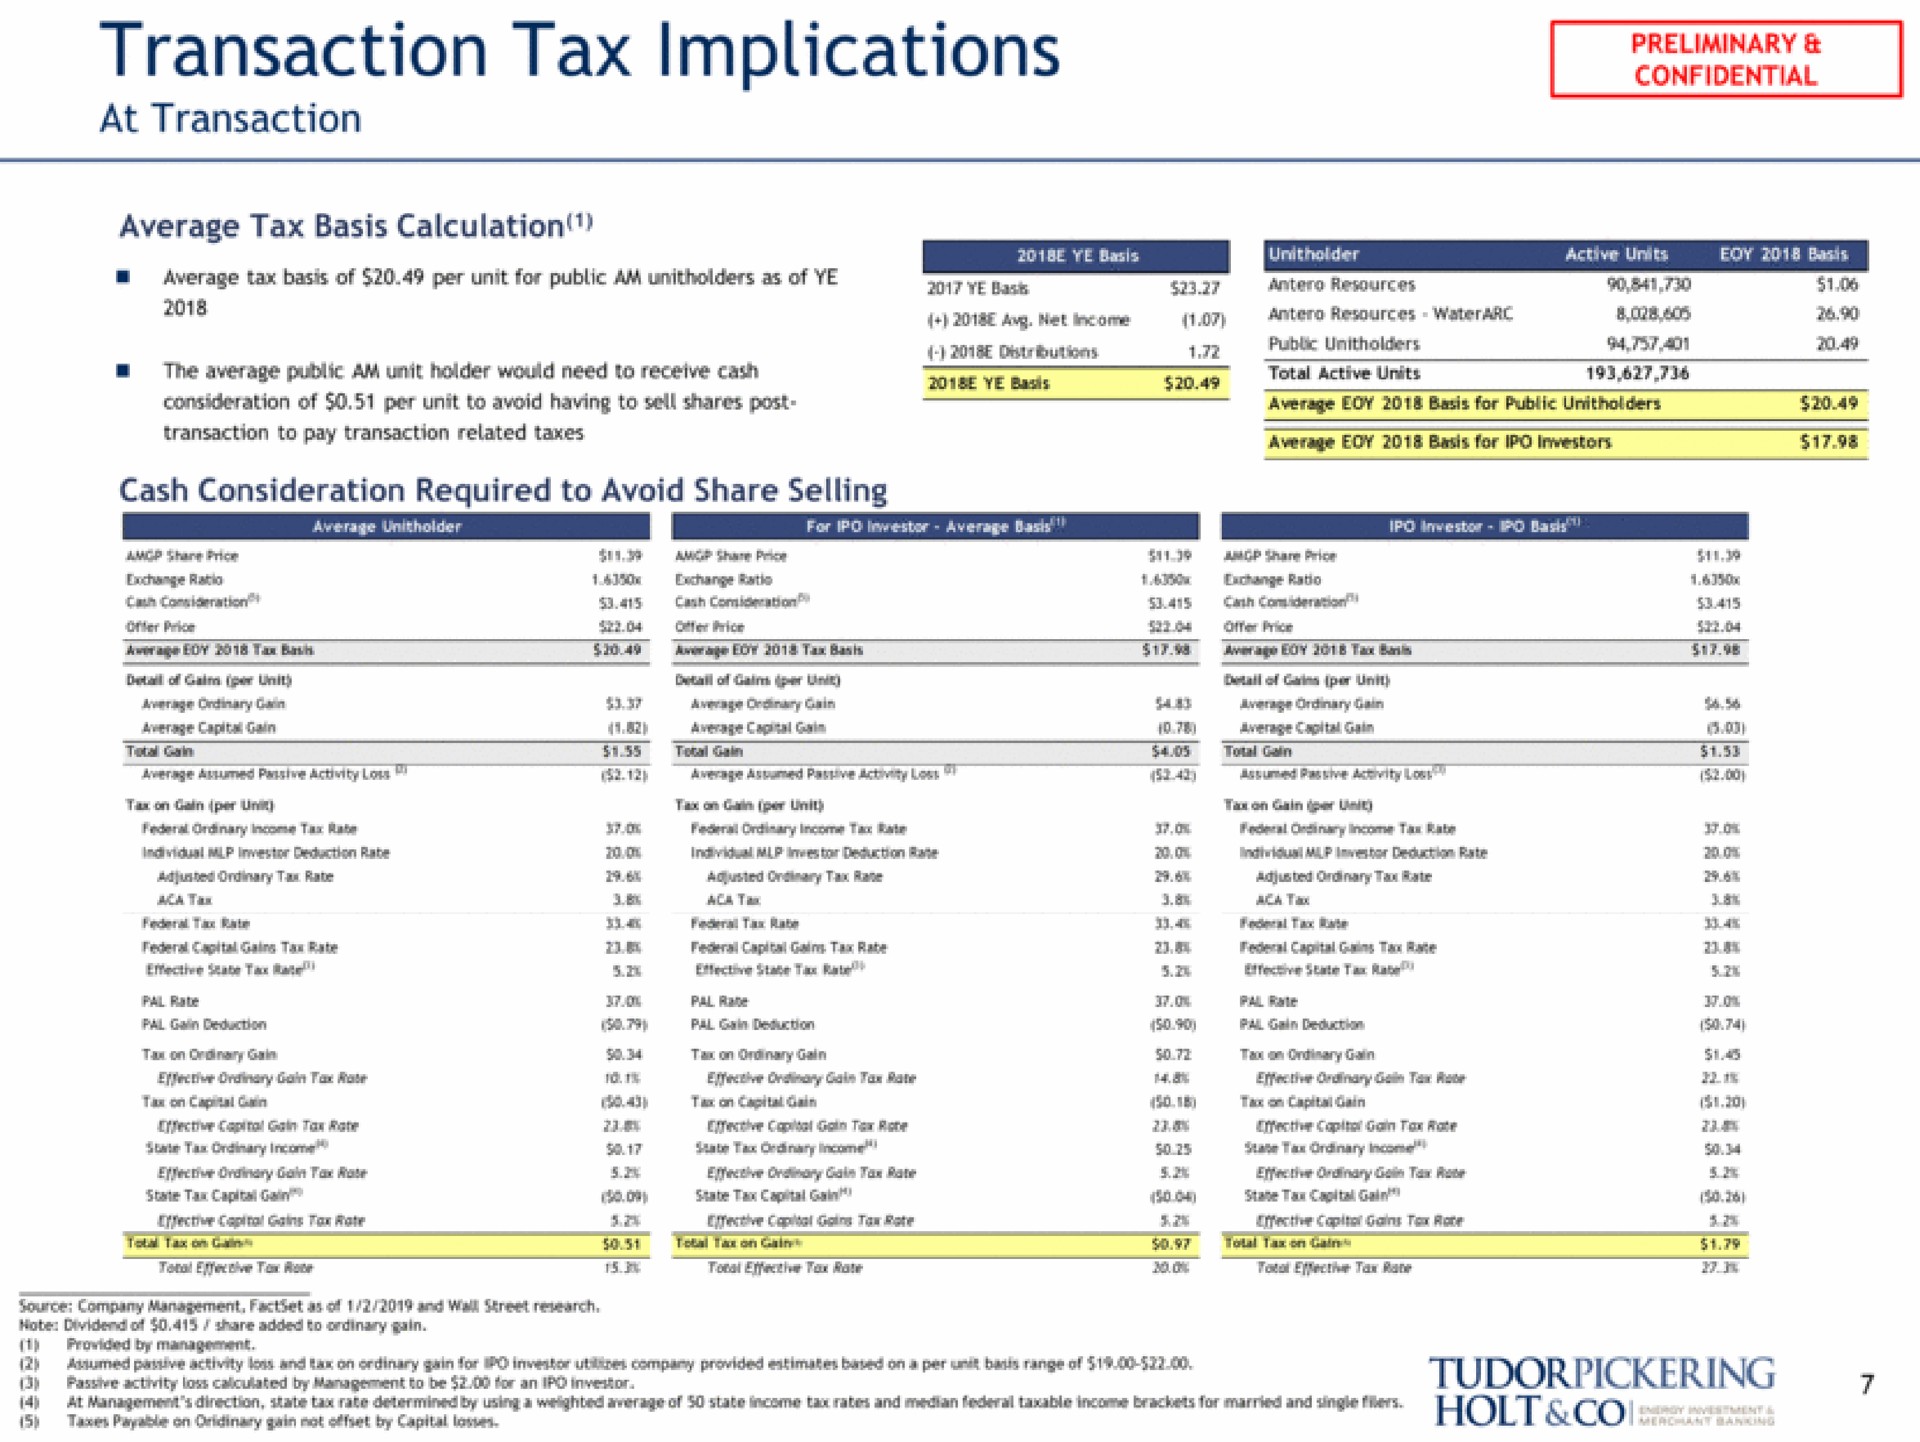 transaction tax implications transaction to pay transaction related taxes average basis for | Tudor, Pickering, Holt & Co